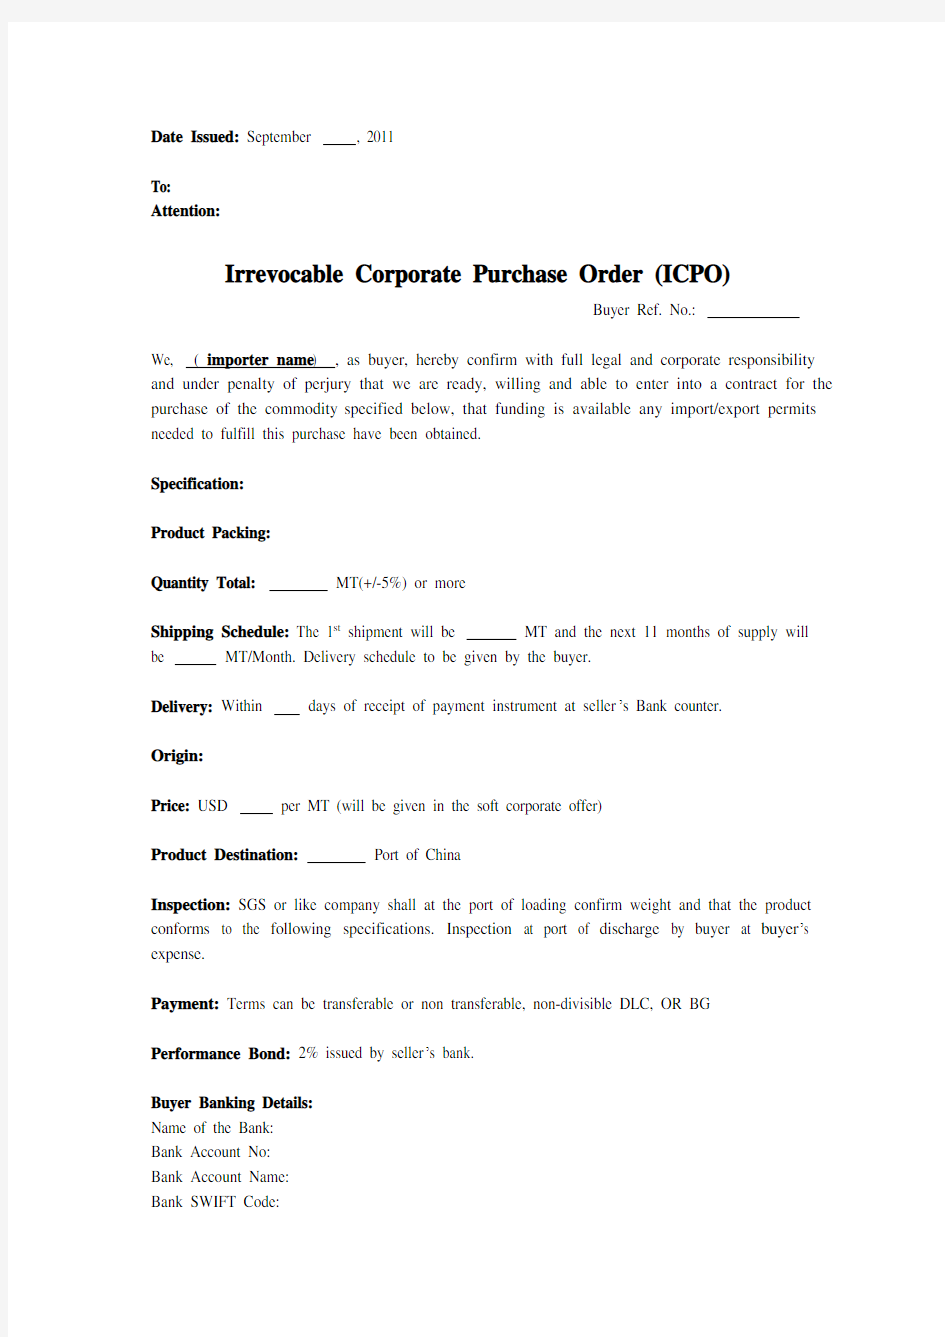 Irrevocable Corporate Purchase Order (ICPO)电子版(中英文版)